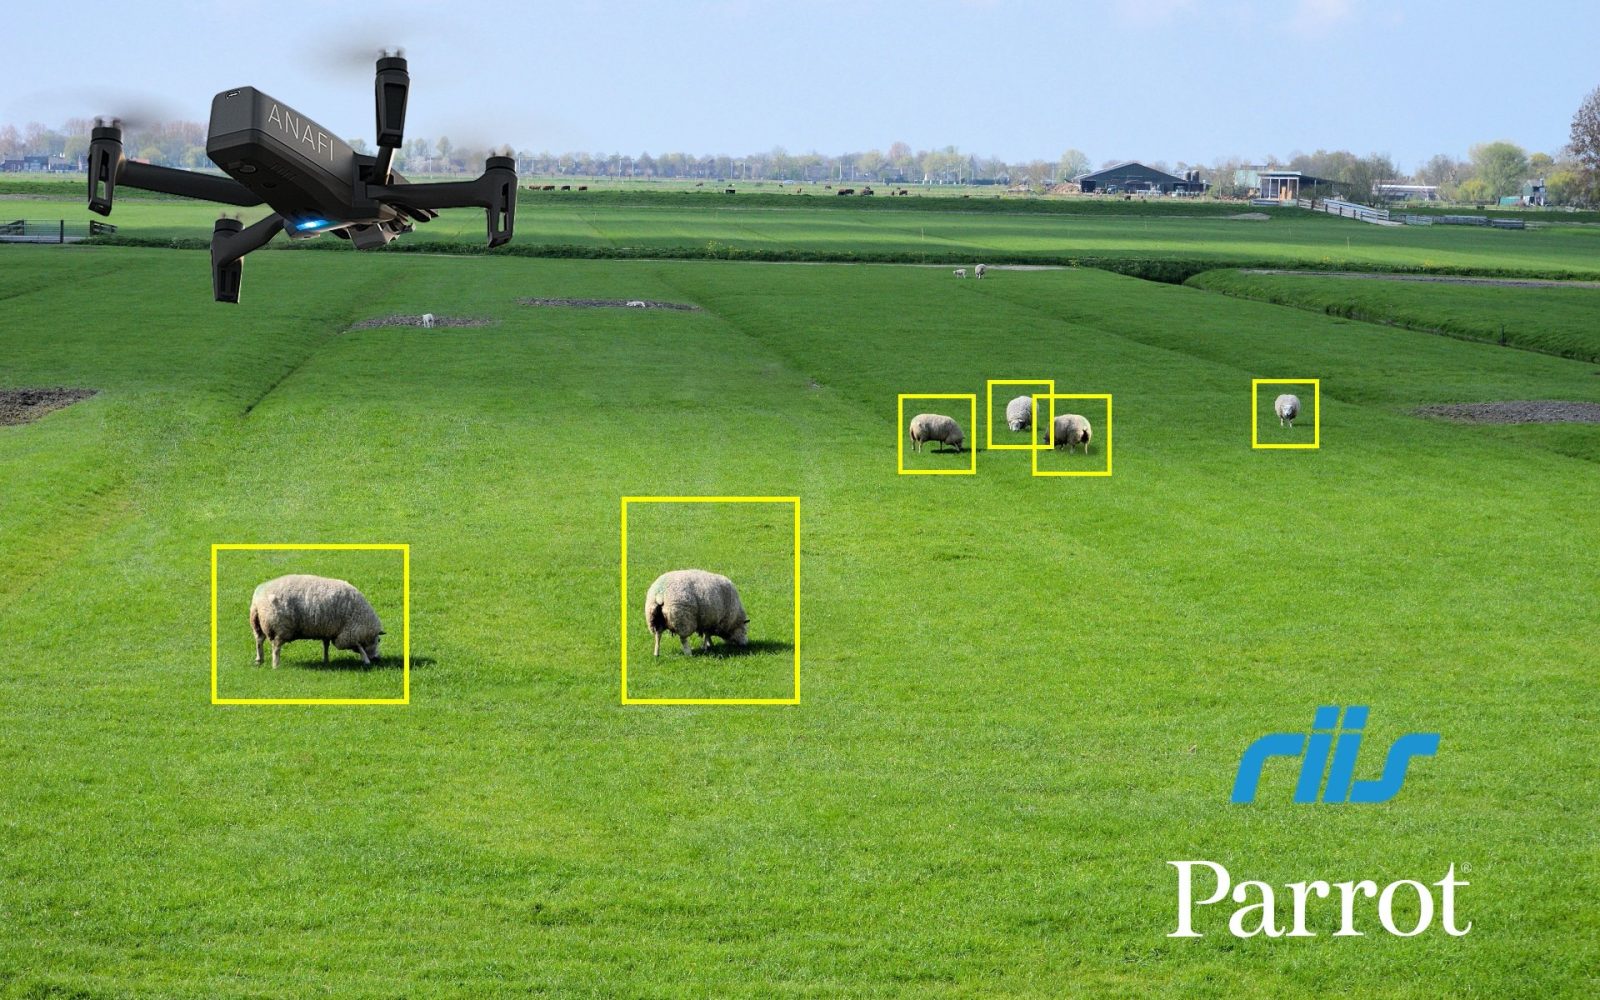 Parrot and RIIS partner to develop AI programs for ANAFI drone platform